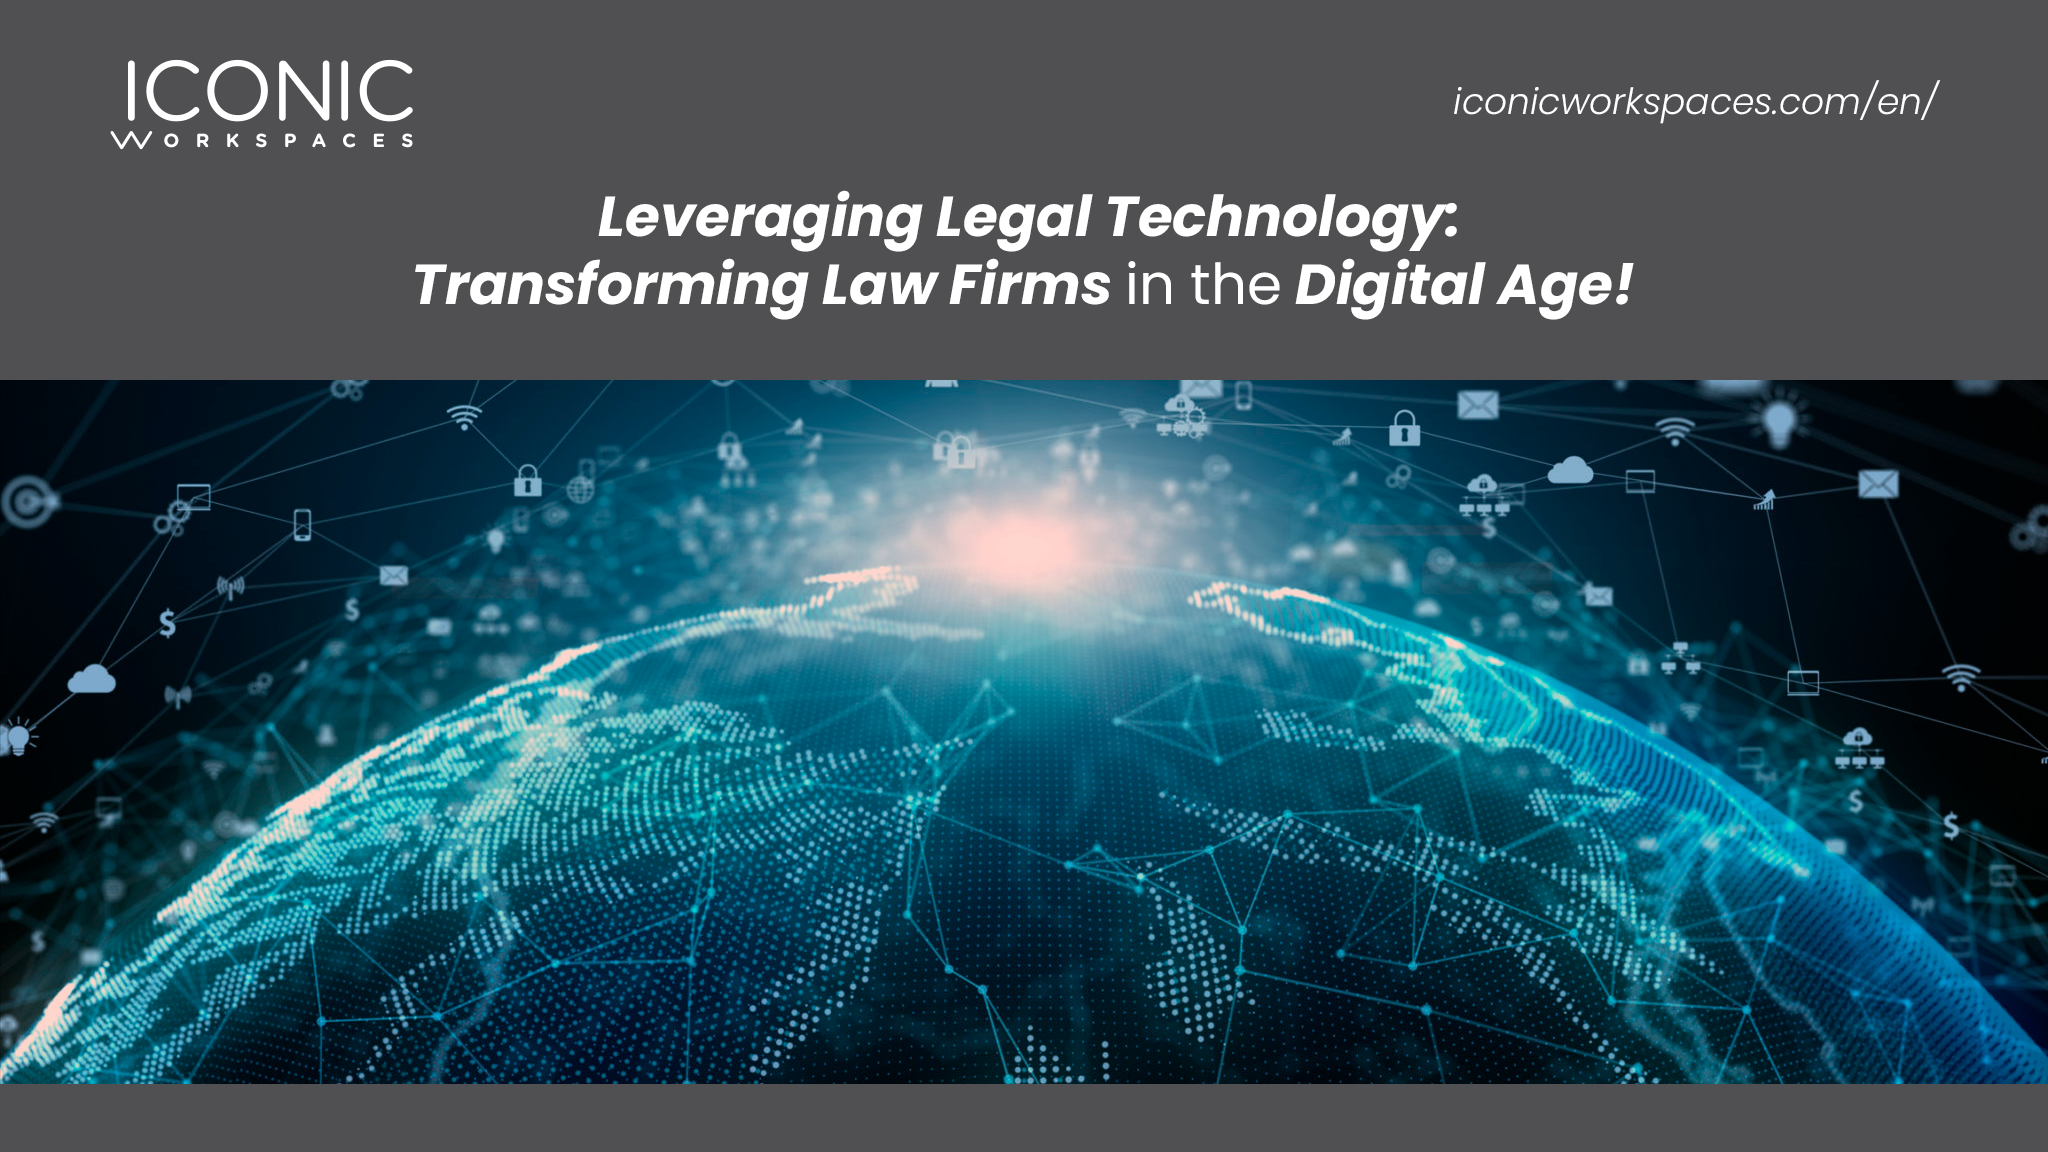 Leveraging Legal Technology: Transforming Law Firms in the Digital Age